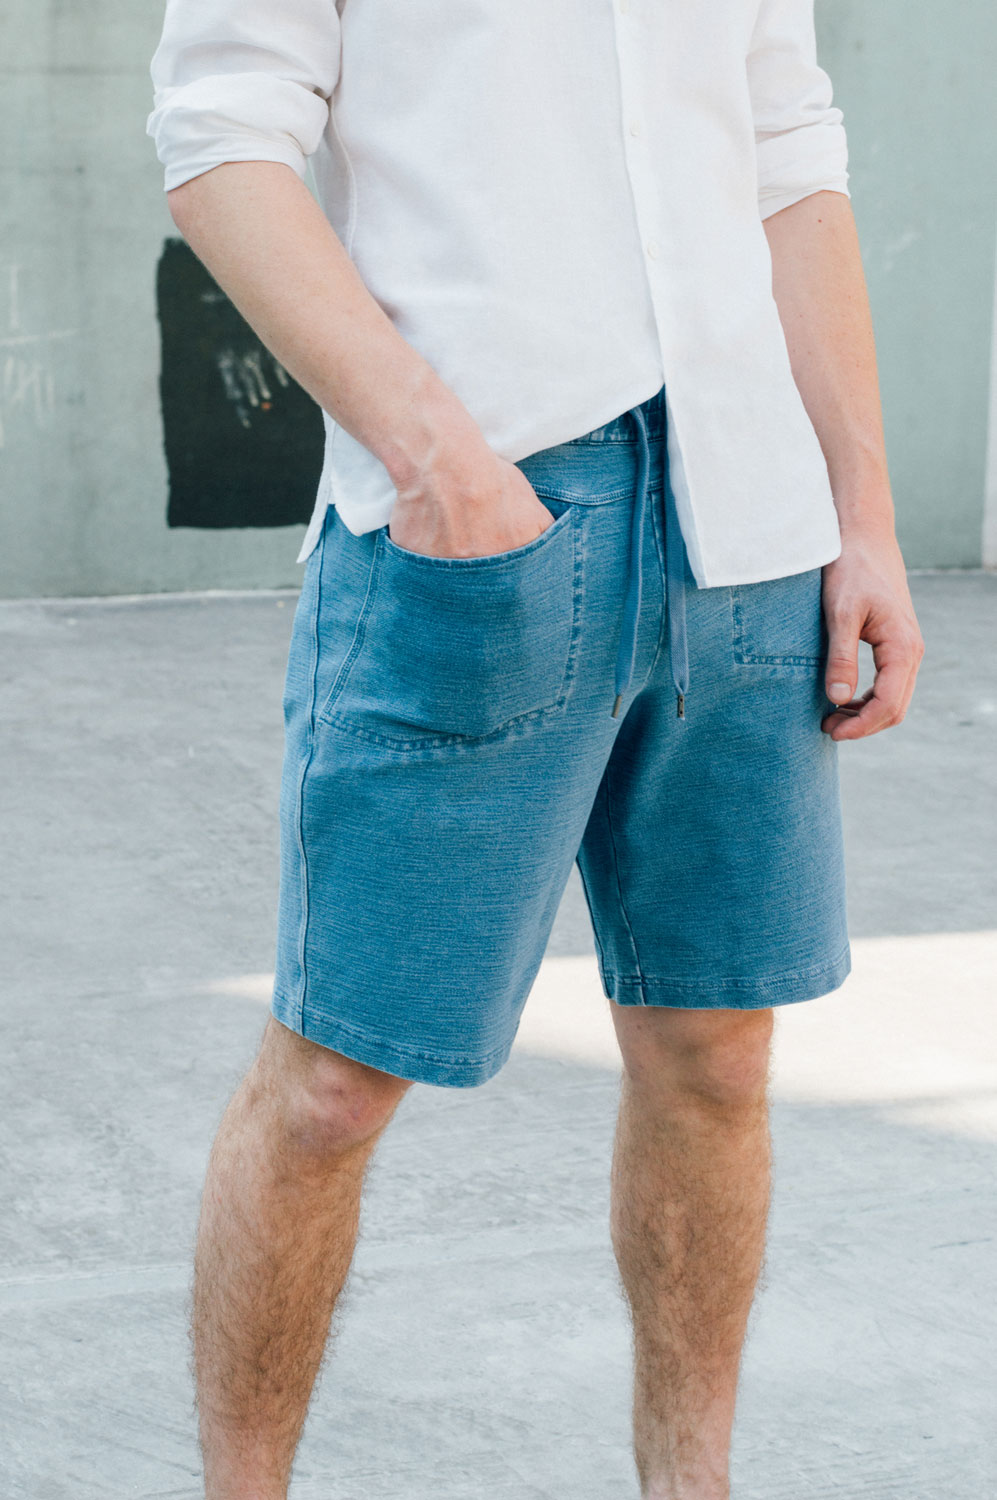 heatwave editorial button down shirt and shorts by ons clothing